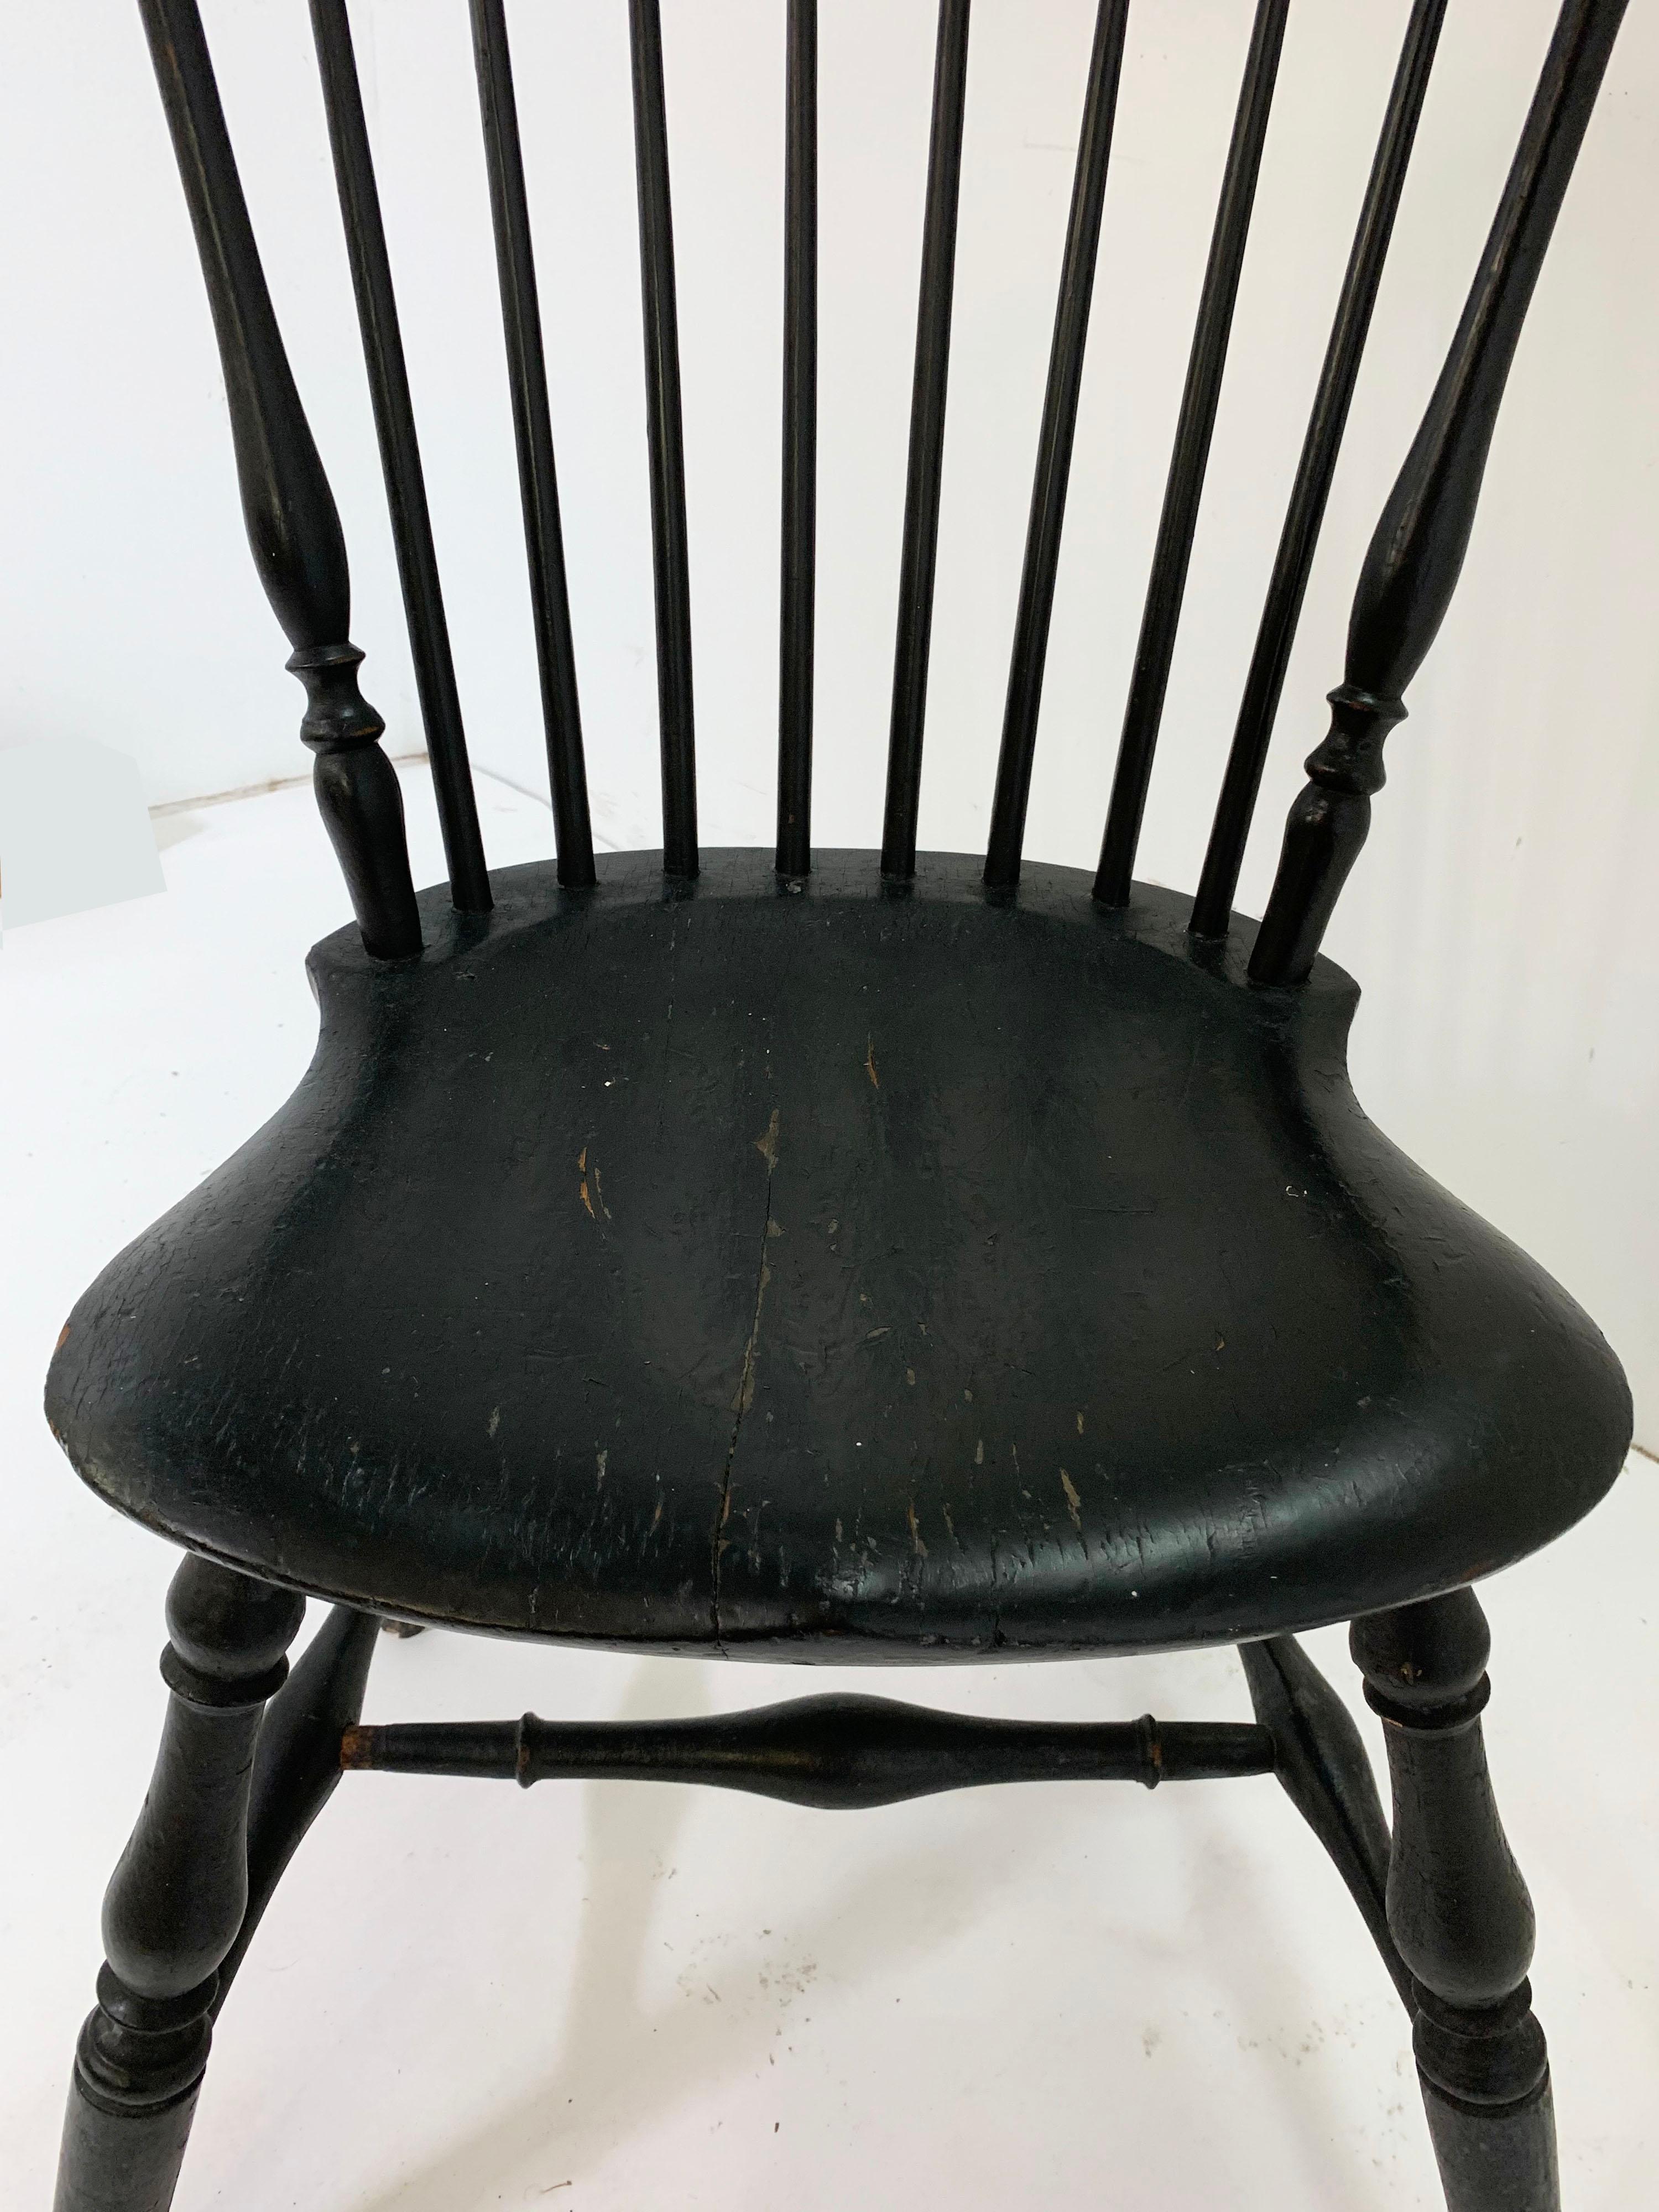 Hand-Painted Early 19th Century Antique Comb-Back Windsor Chair Signed S. Hill